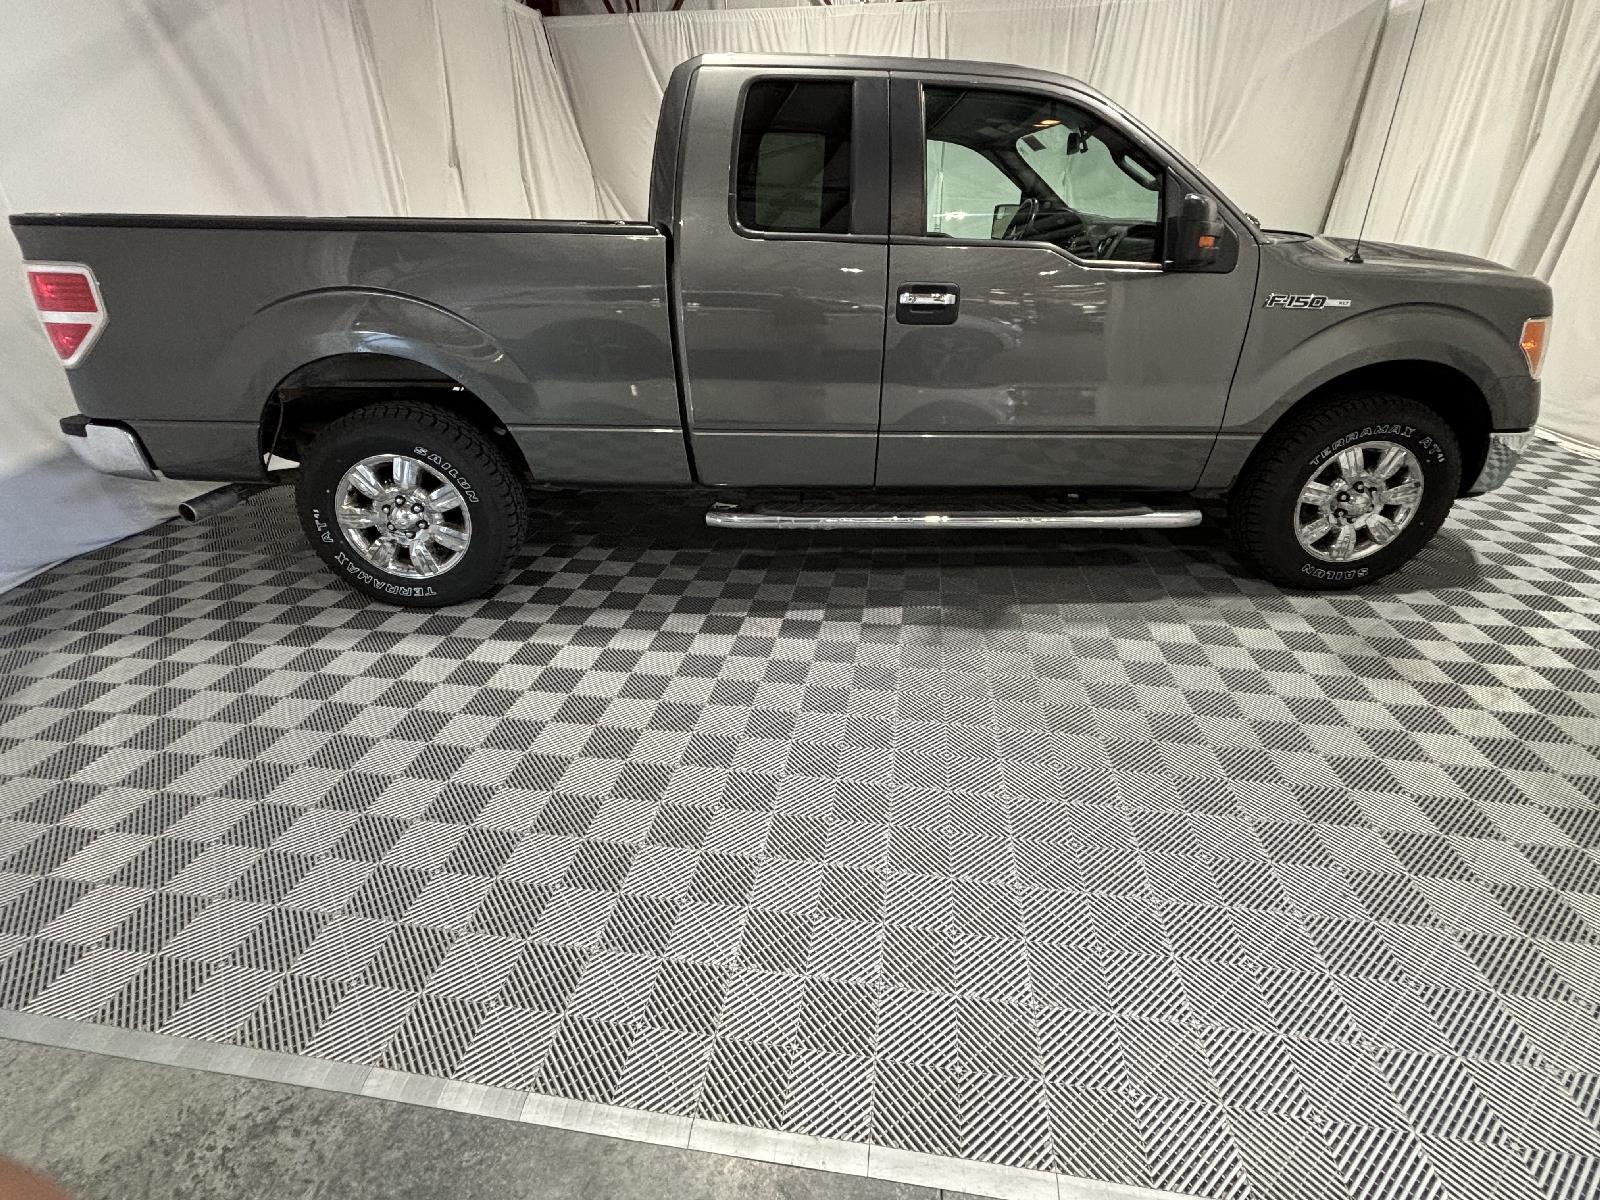 Used 2012 Ford F-150 XLT Extended Cab Truck for sale in St Joseph MO